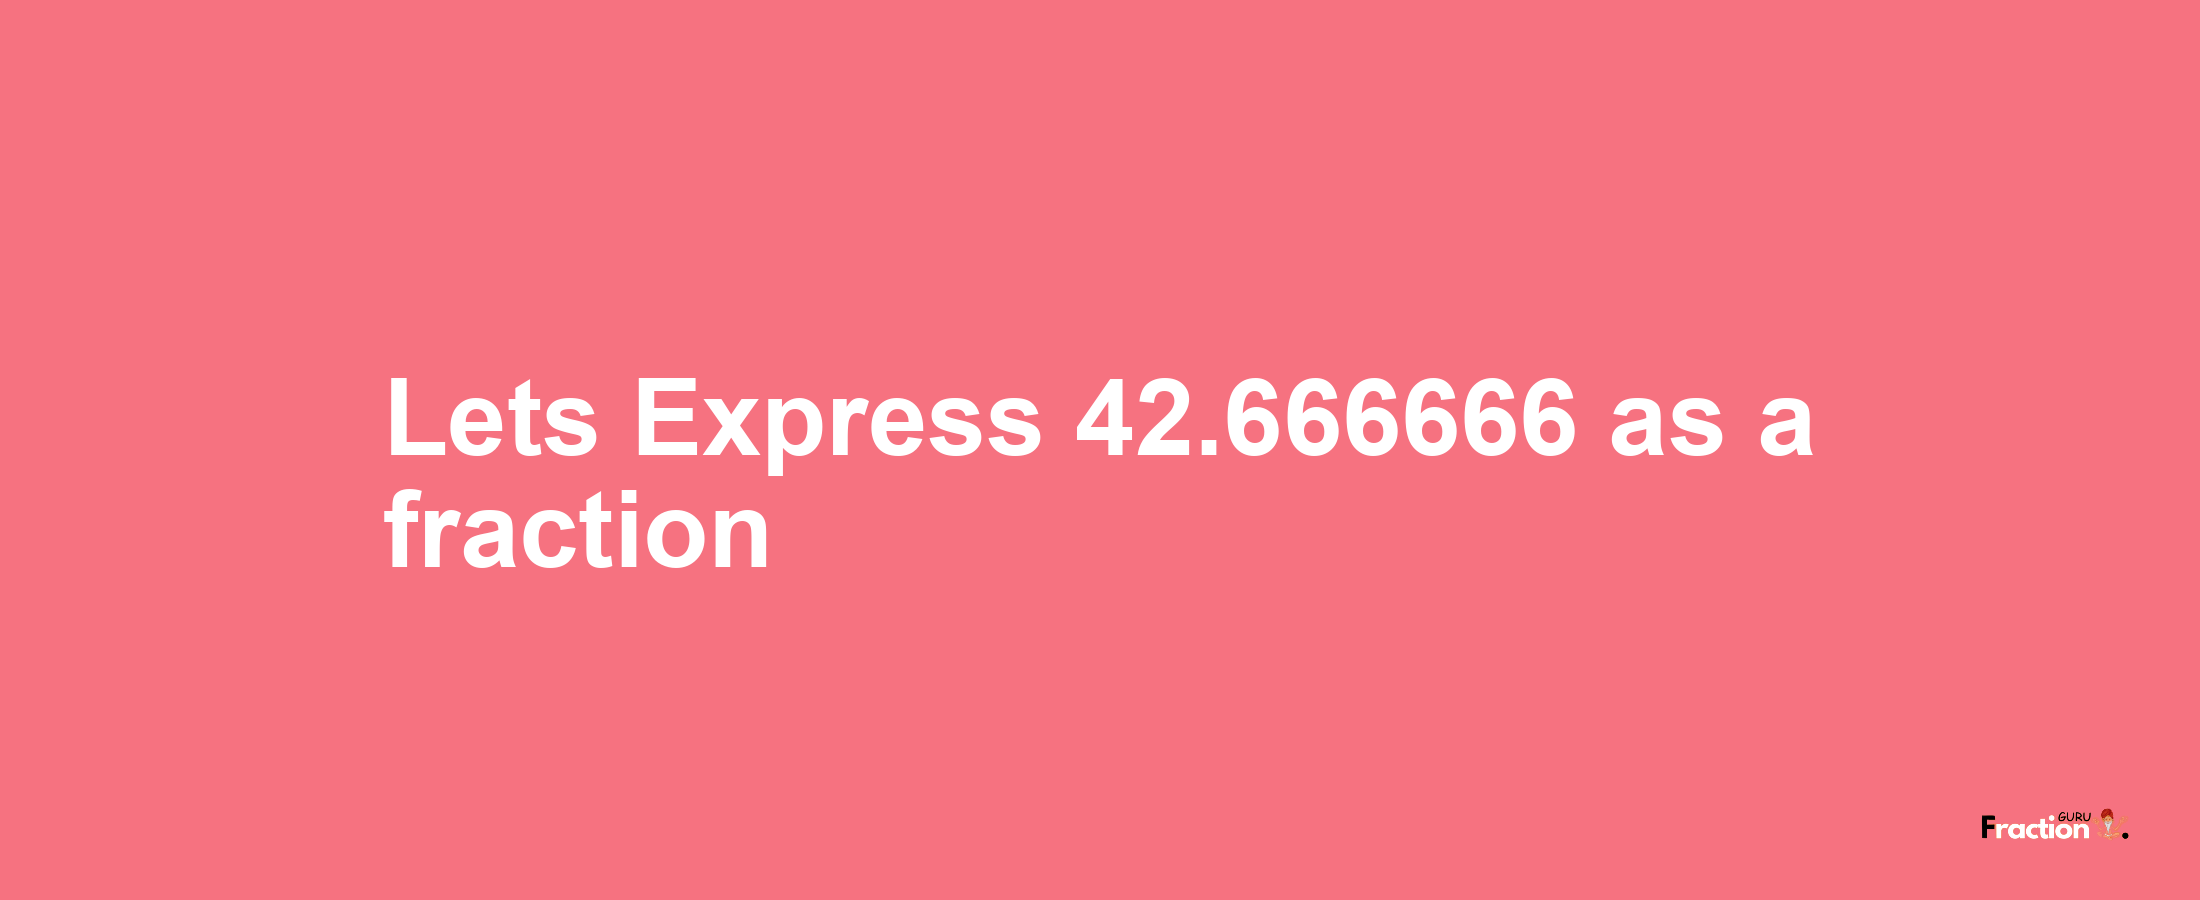 Lets Express 42.666666 as afraction